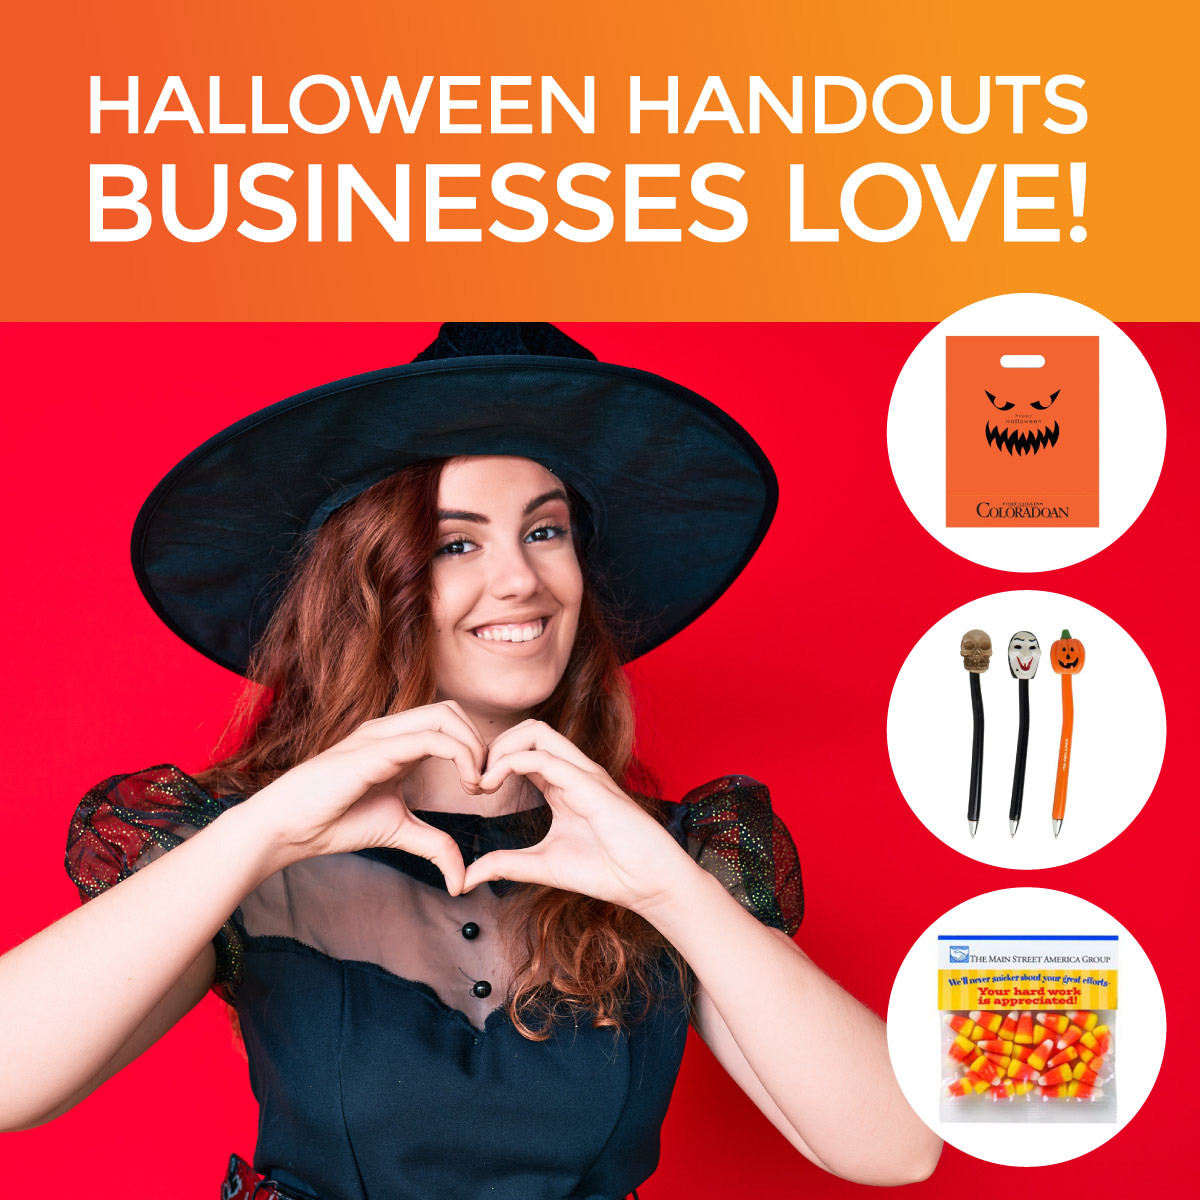 Halloween Handouts Businesses love featuring image of woman wearing halloween costume and 3 promotional products